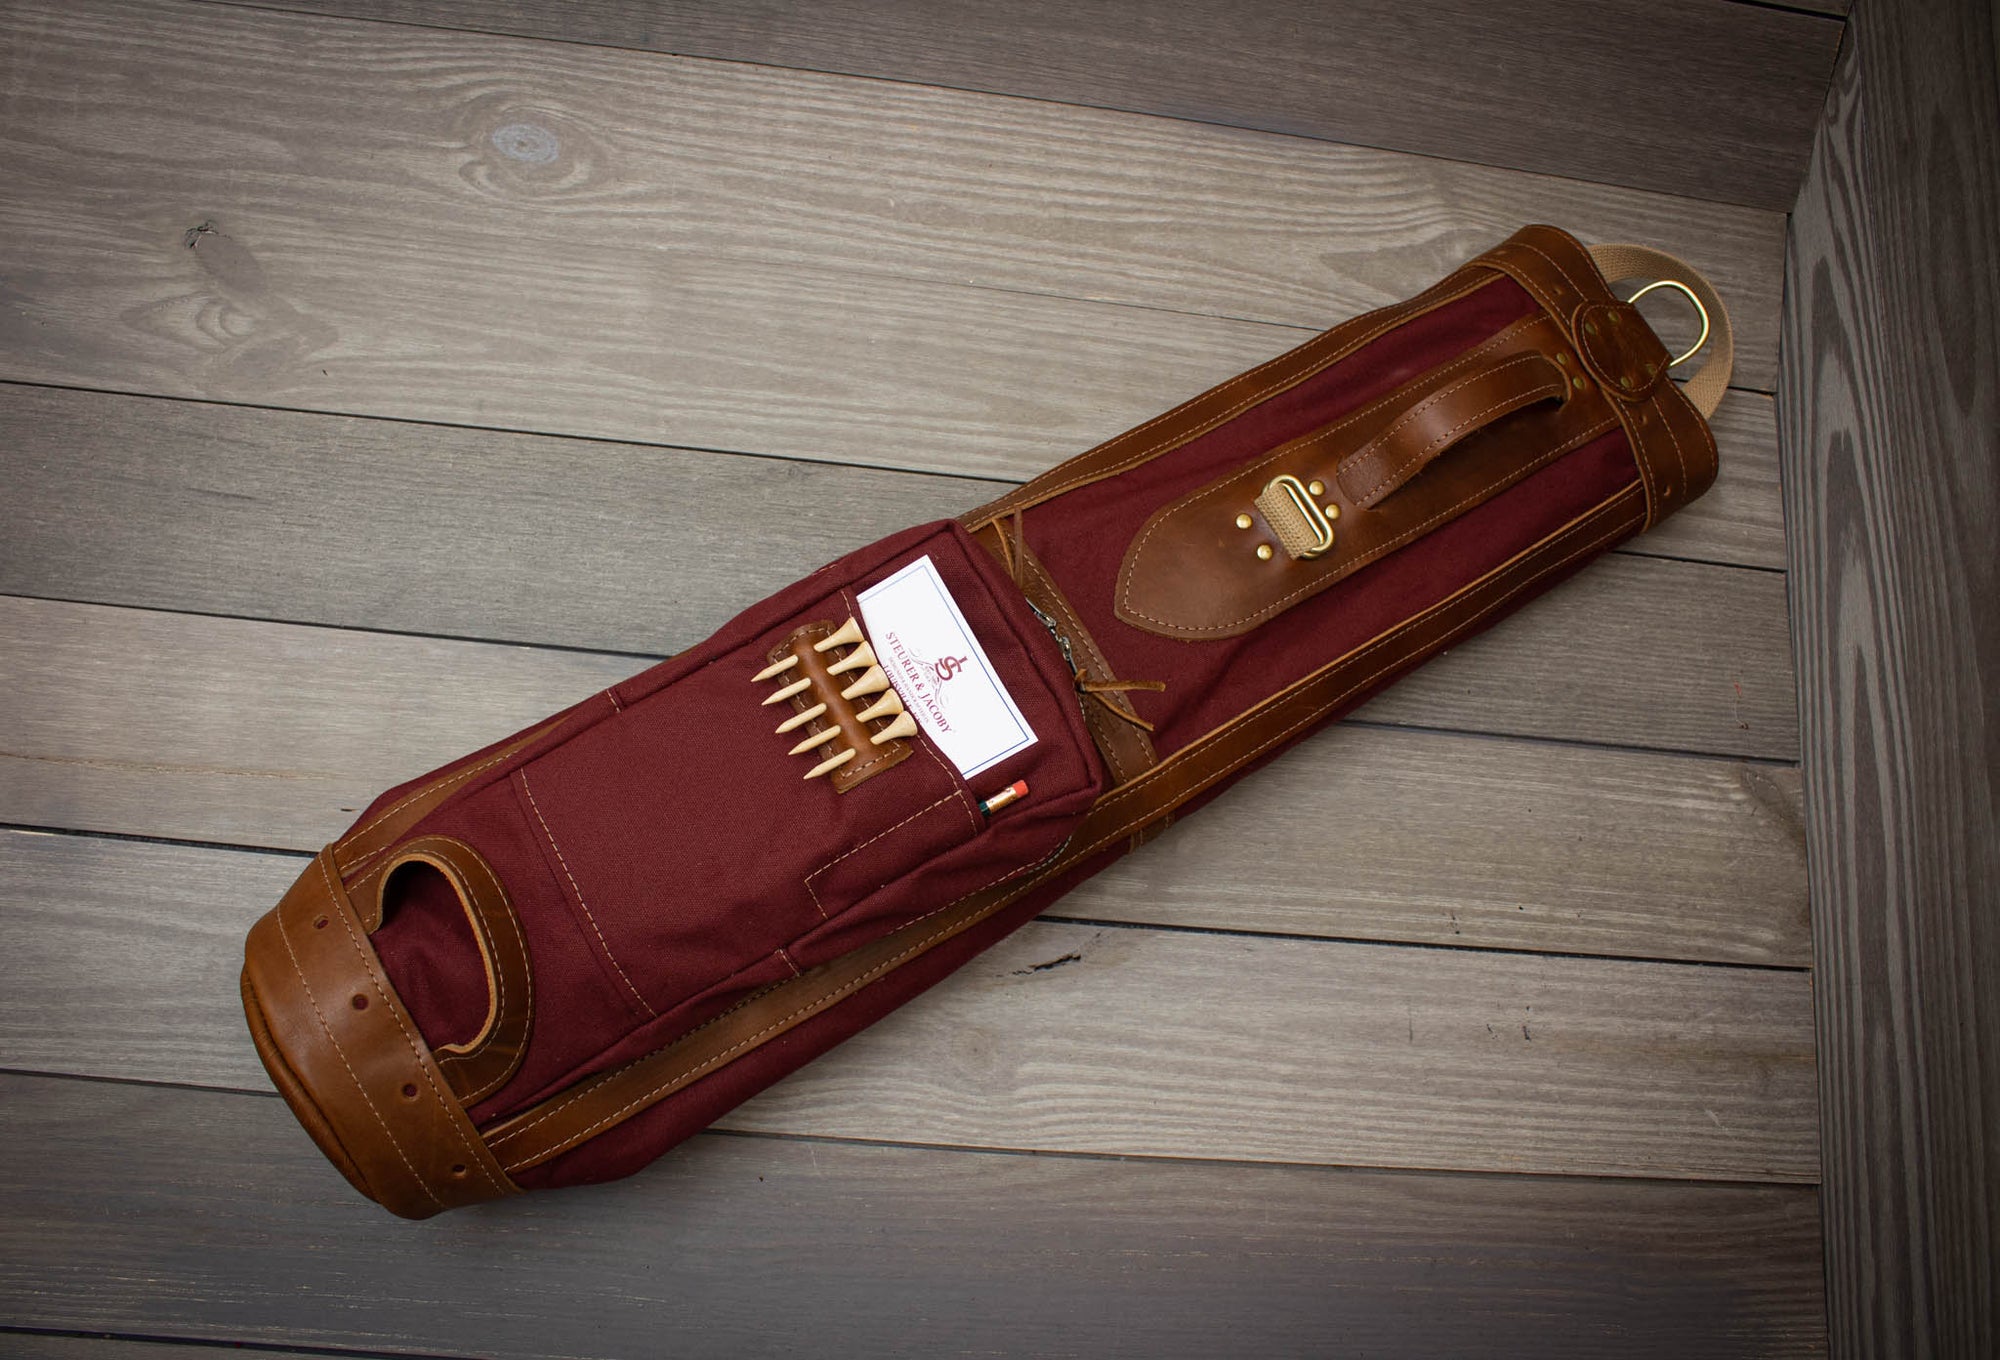 The Original Steurer & Jacoby Pencil Golf Bag in Maroon